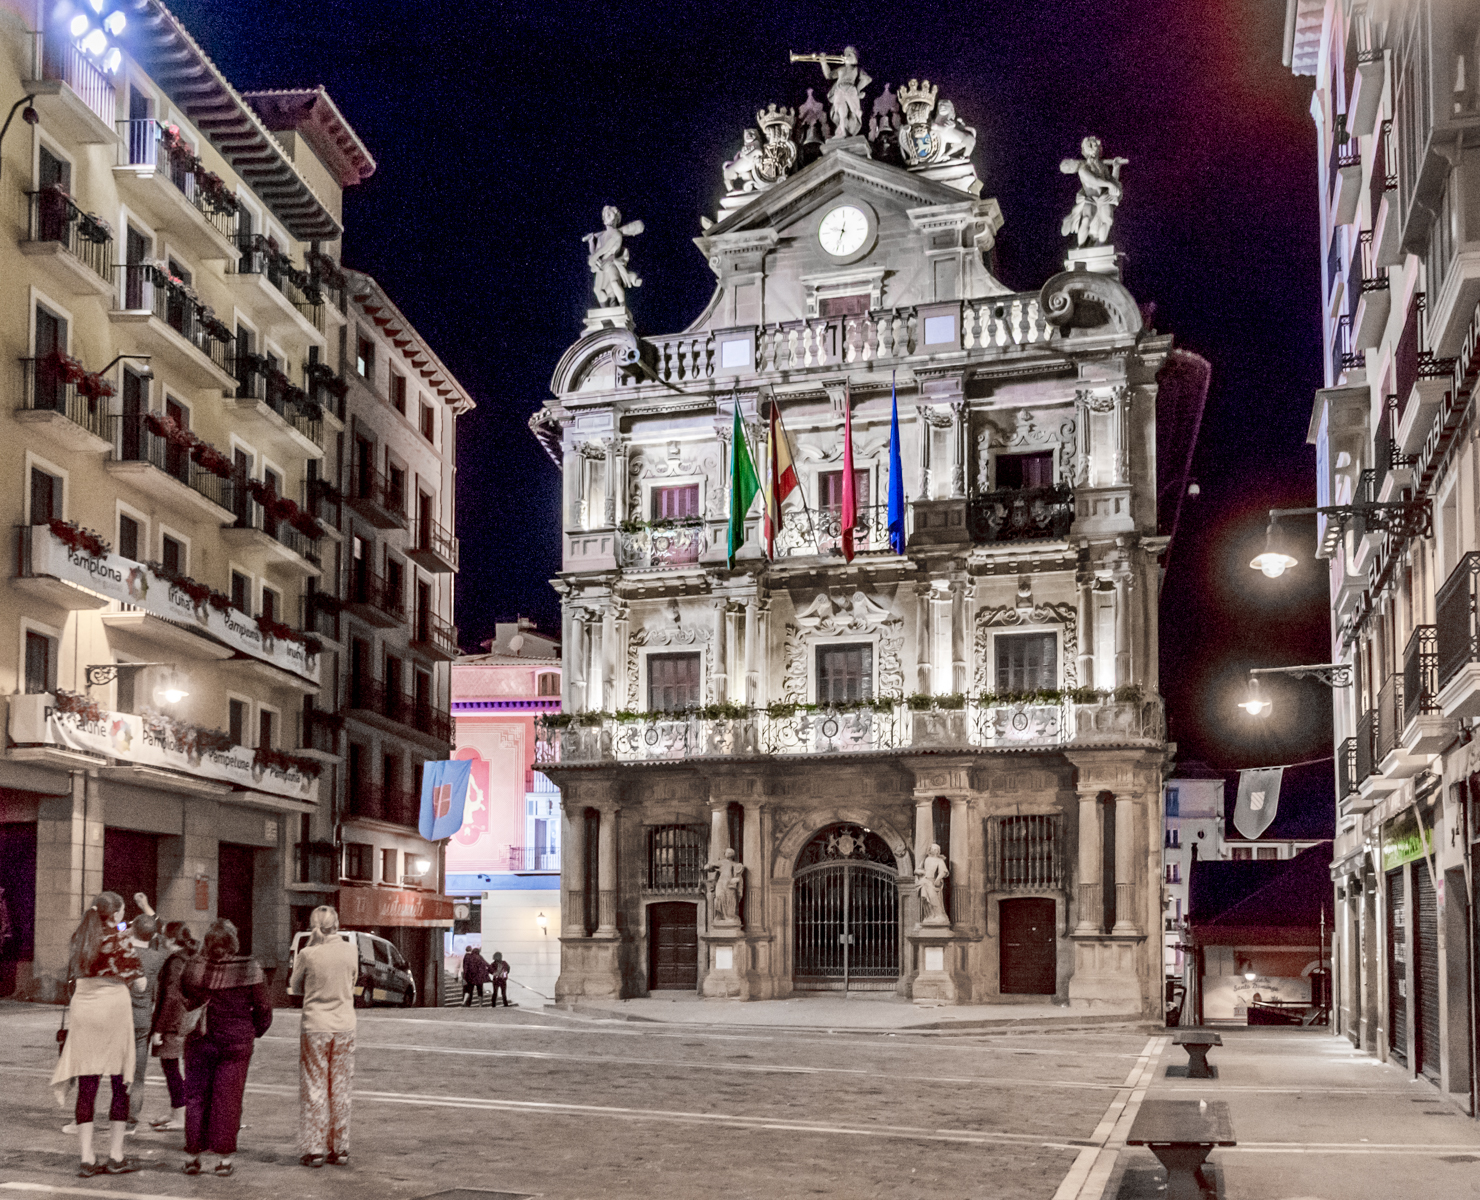 Front of Pamplona Town Hall at night, Pamplona, Spain | Photo by Mike Hudak